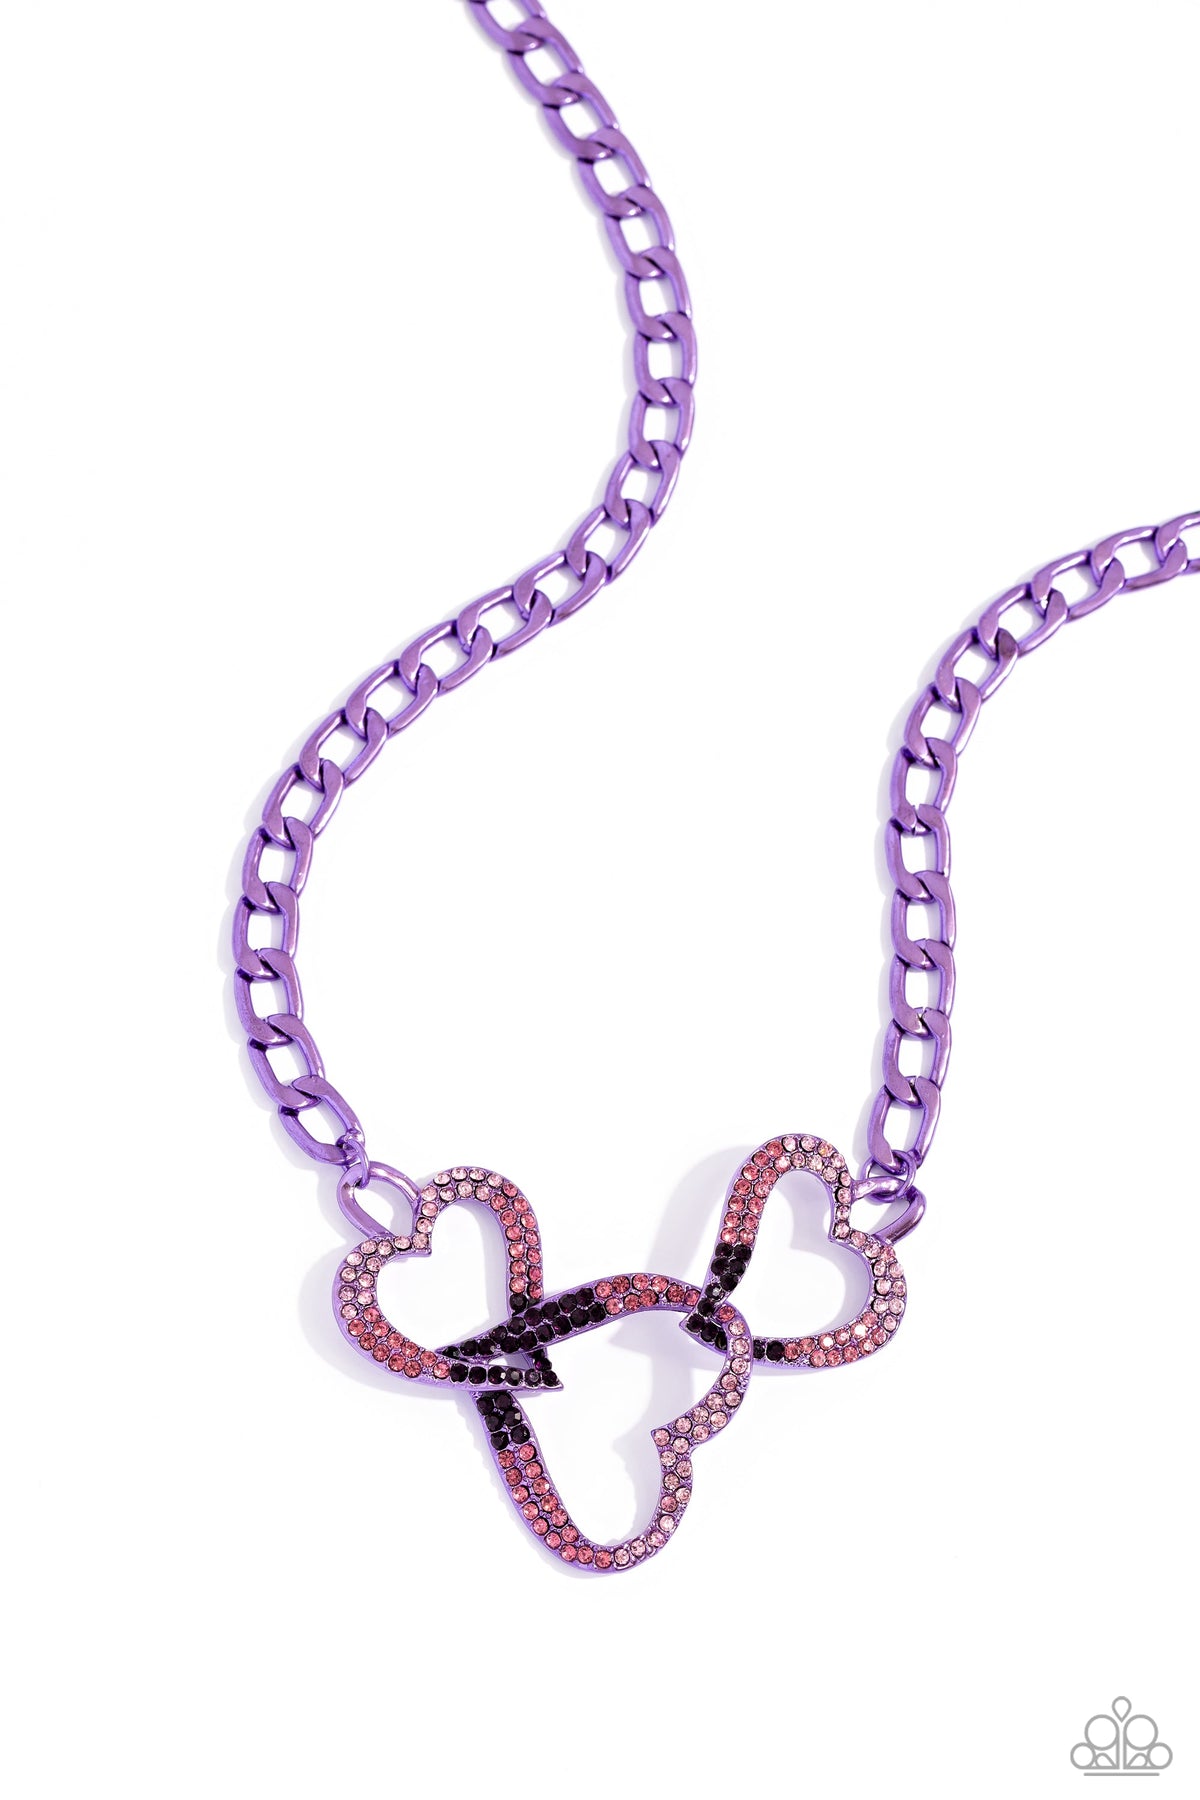 Eclectically Enamored Purple Heart Necklace - Paparazzi Accessories- lightbox - CarasShop.com - $5 Jewelry by Cara Jewels